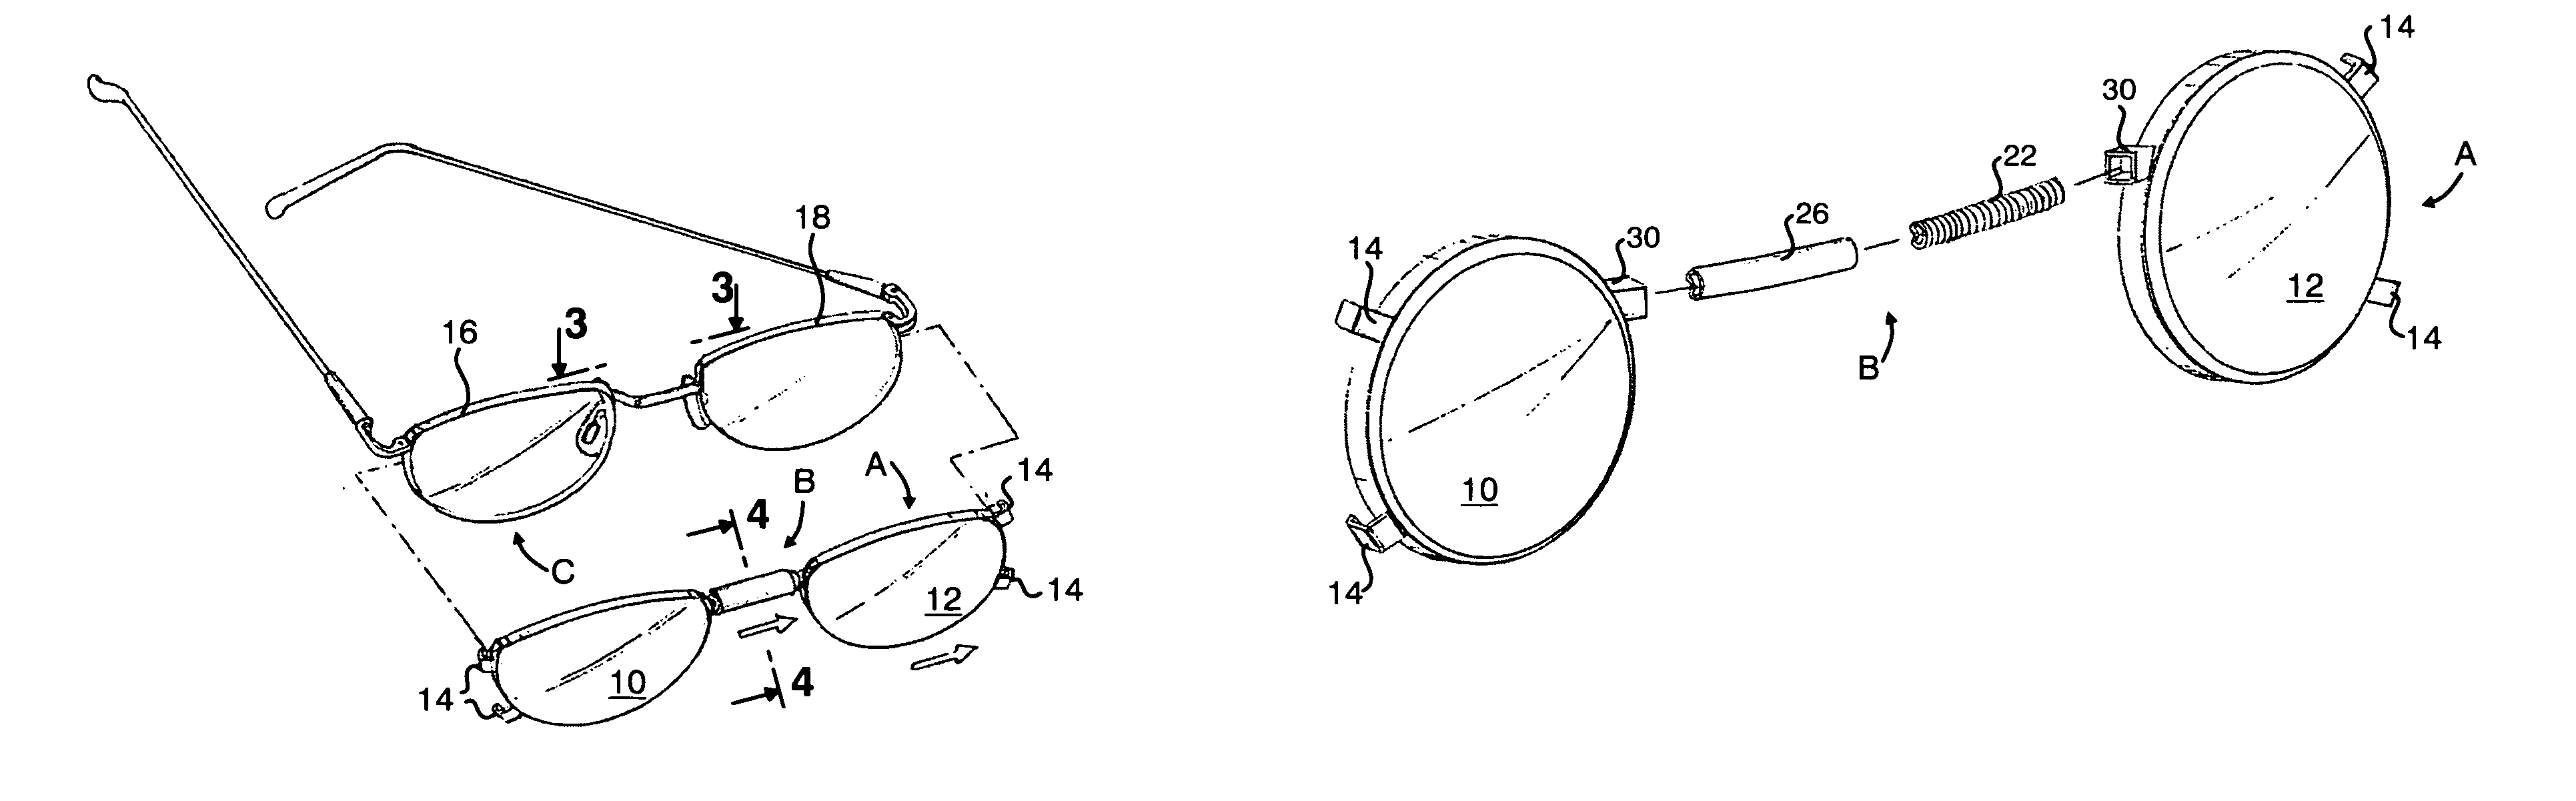 Clip-on with flexible and expandable bridge member